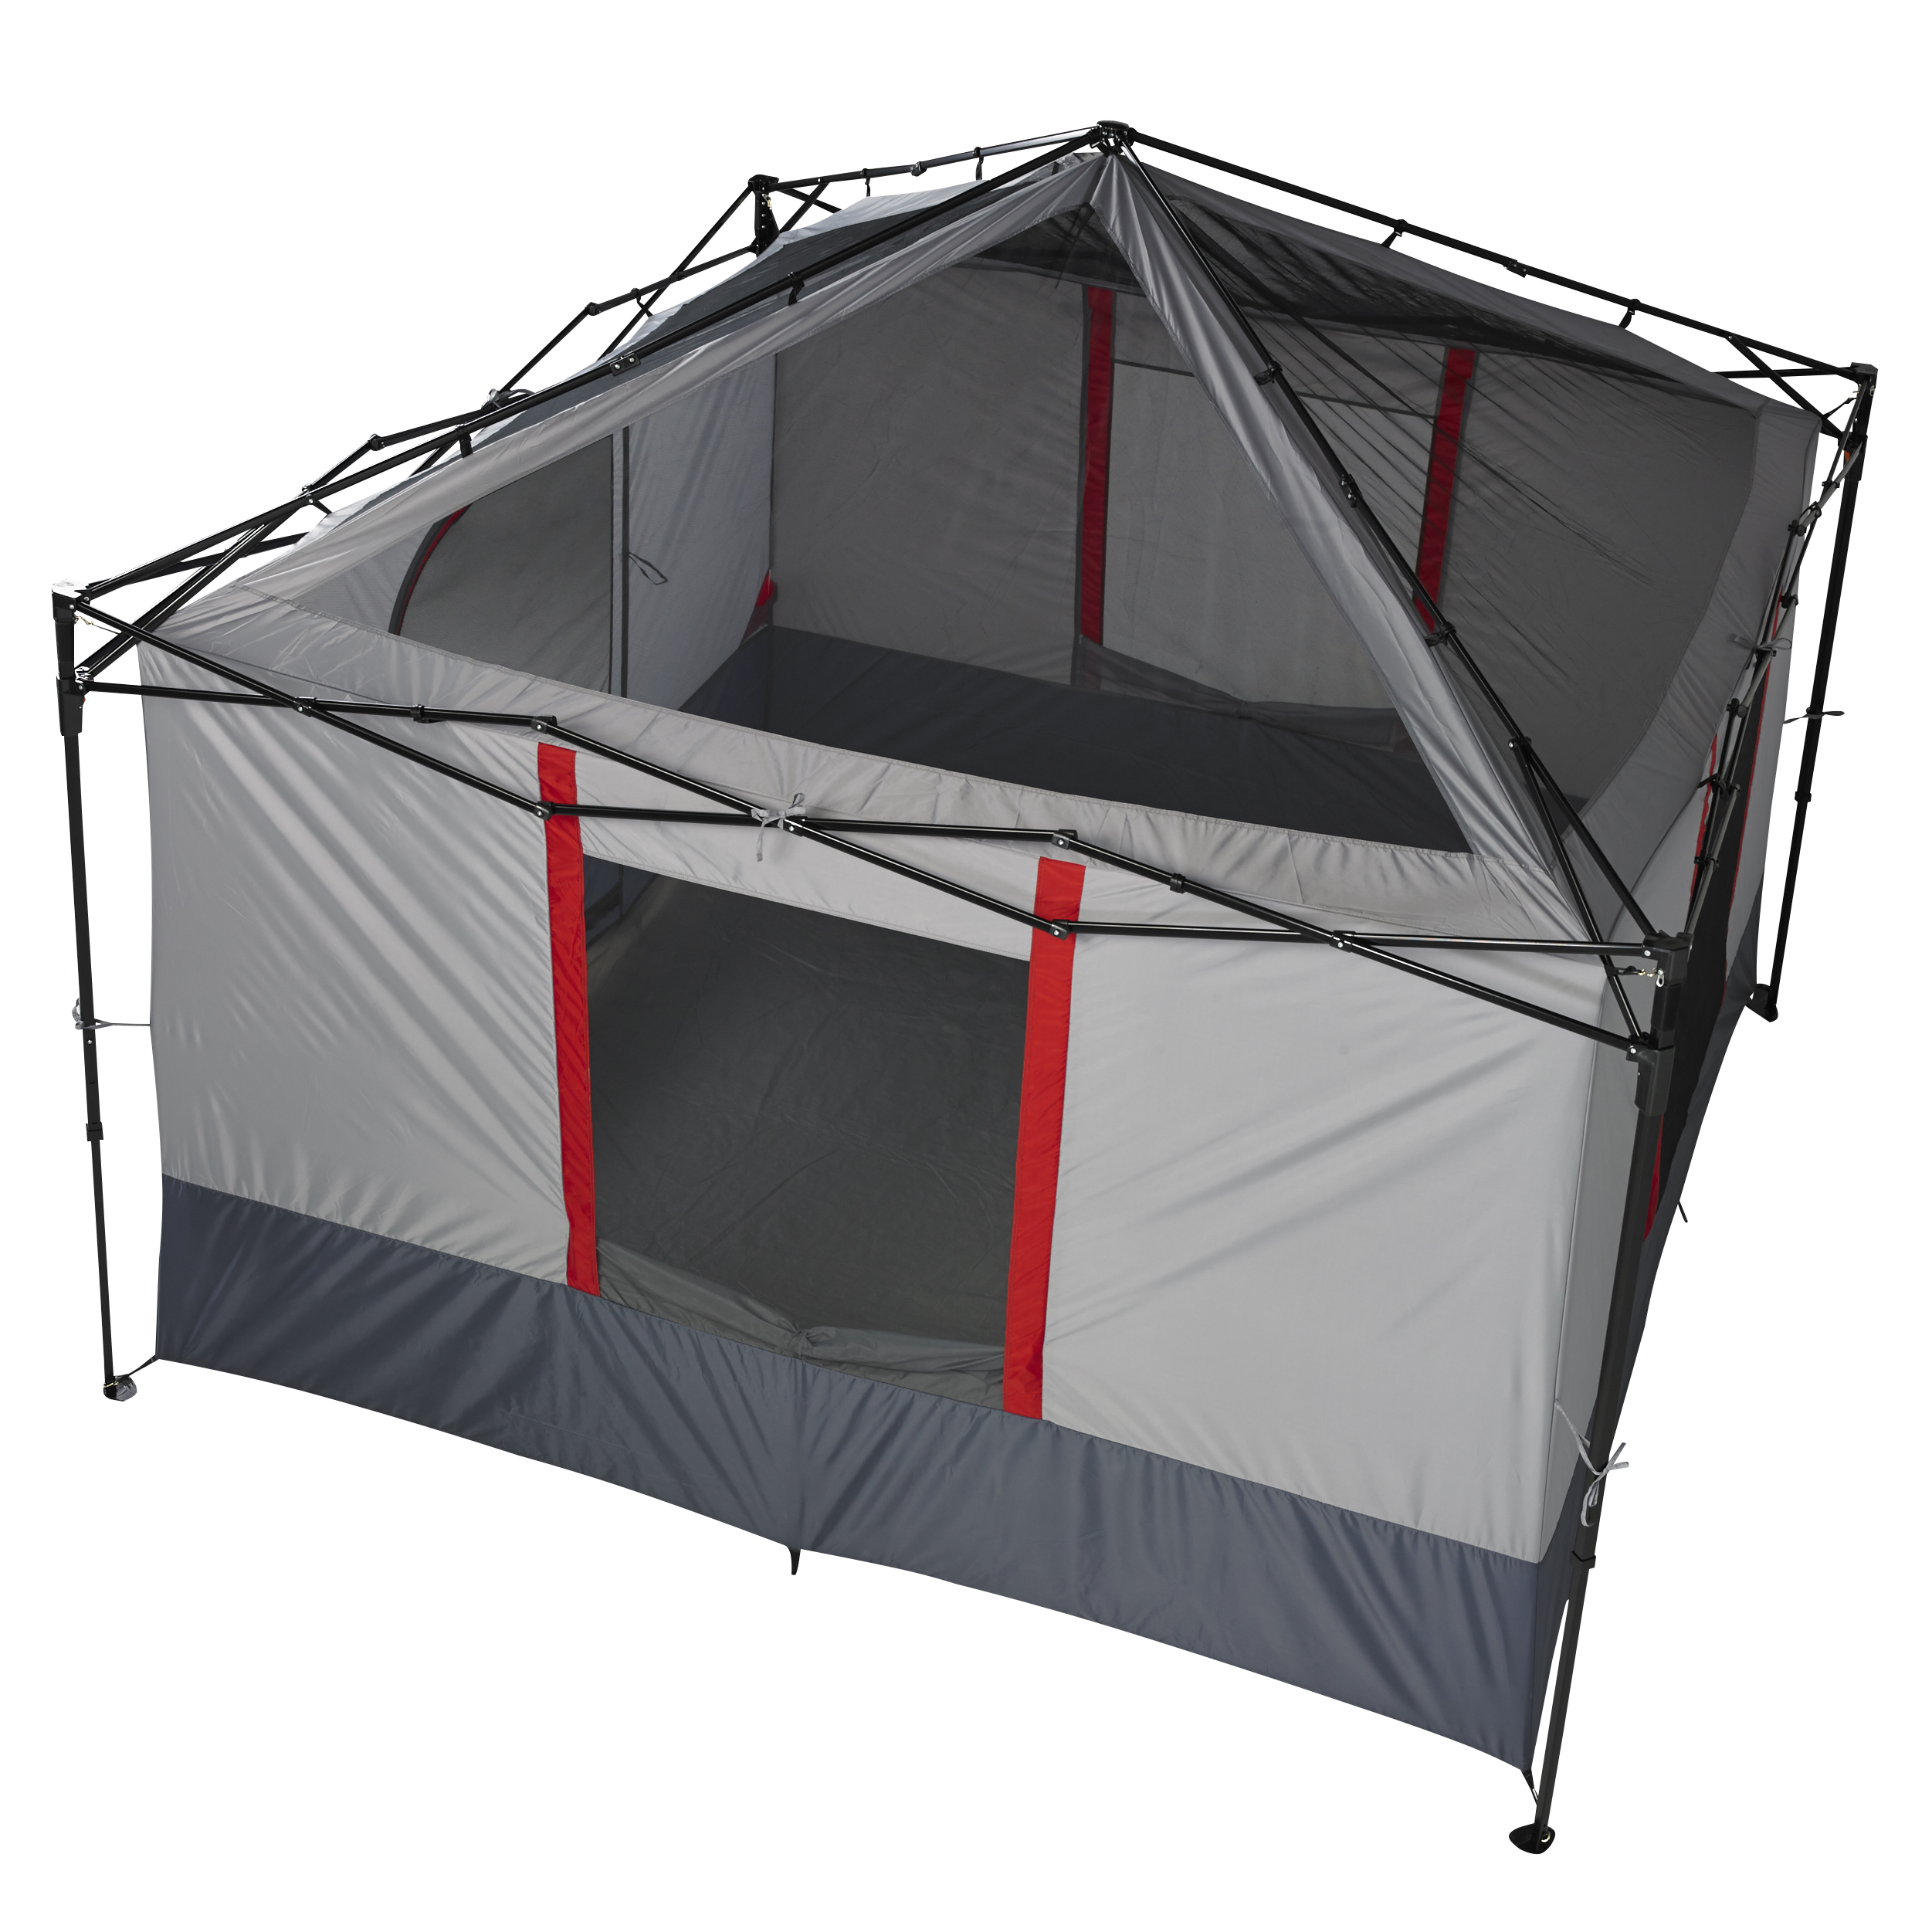 Ozark Trail ConnecTent 6-Person Canopy Tent, Straight-Leg Canopy Sold Separately - image 4 of 9